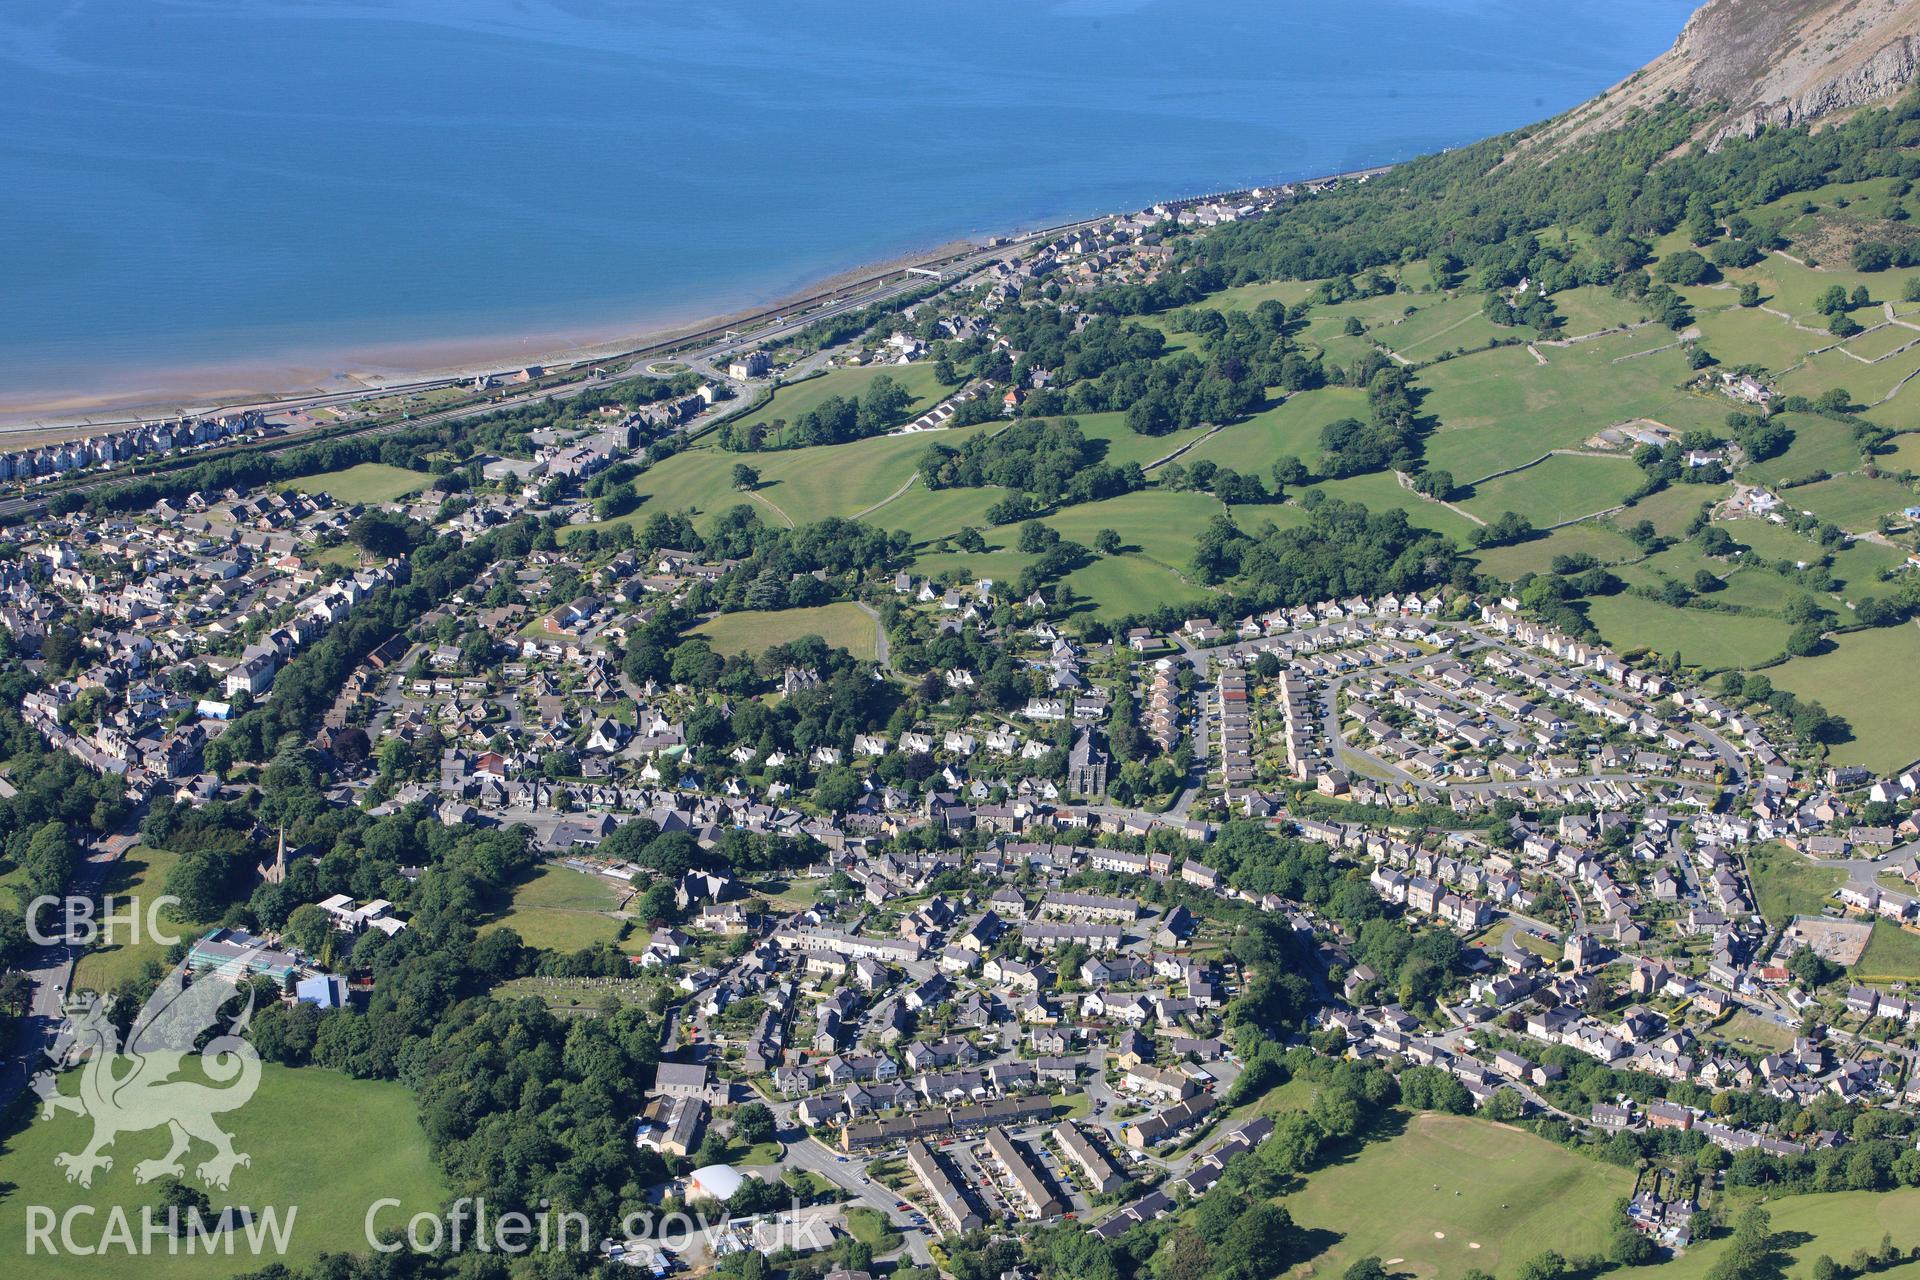 RCAHMW colour oblique photograph of Llanfairfechan, from the south. Taken by Toby Driver on 16/06/2010.